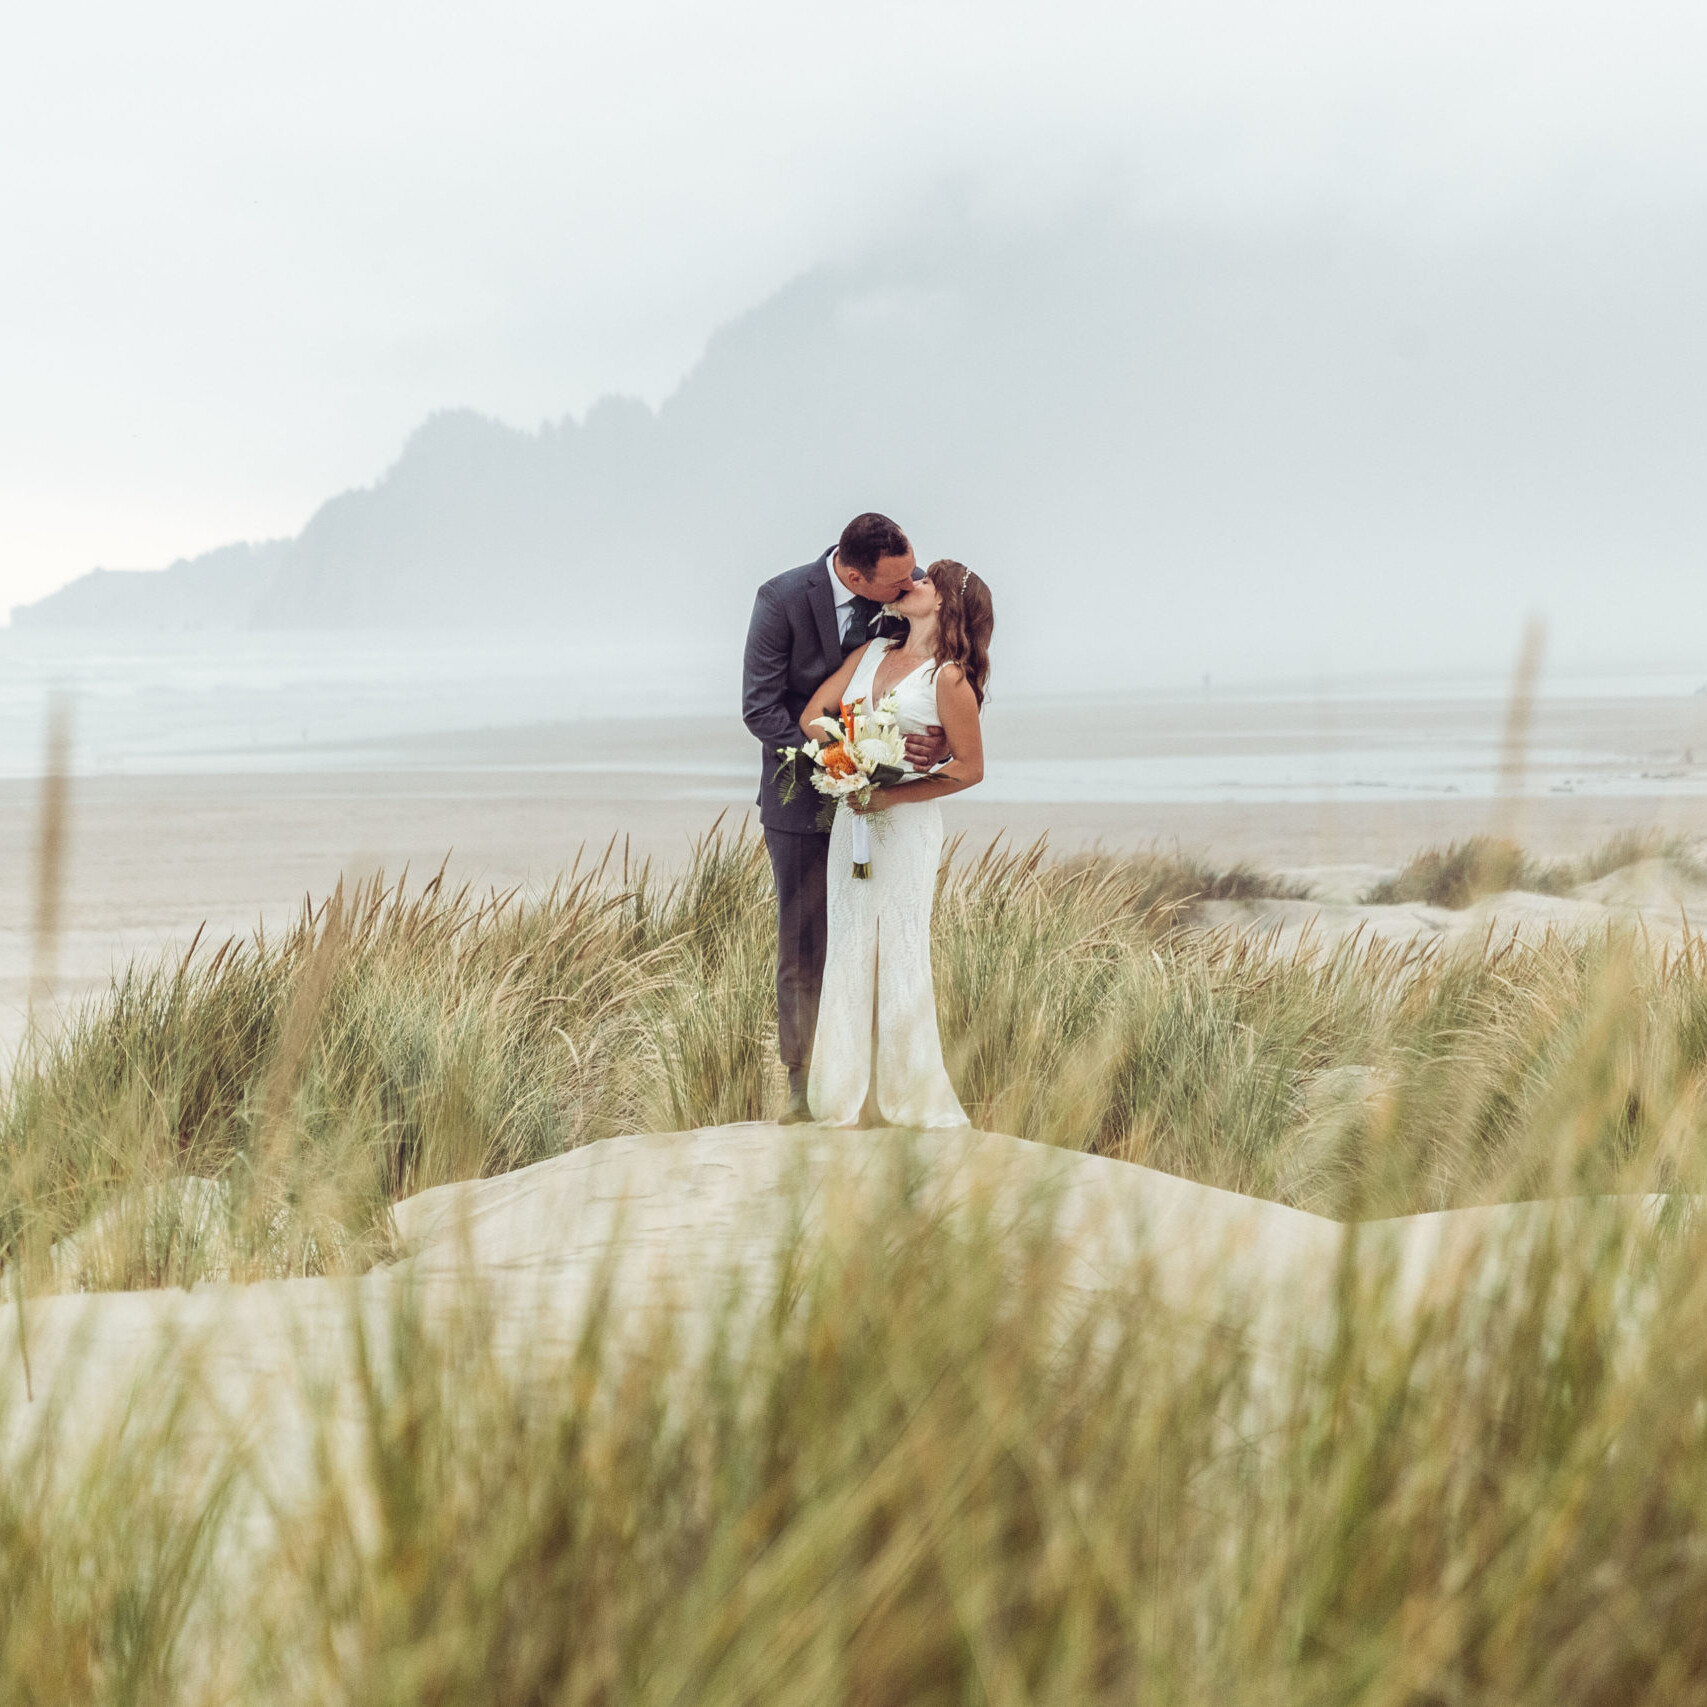 Wedding photography of a couple on the beach in sand dunes at Manzanita on the Oregon Coast